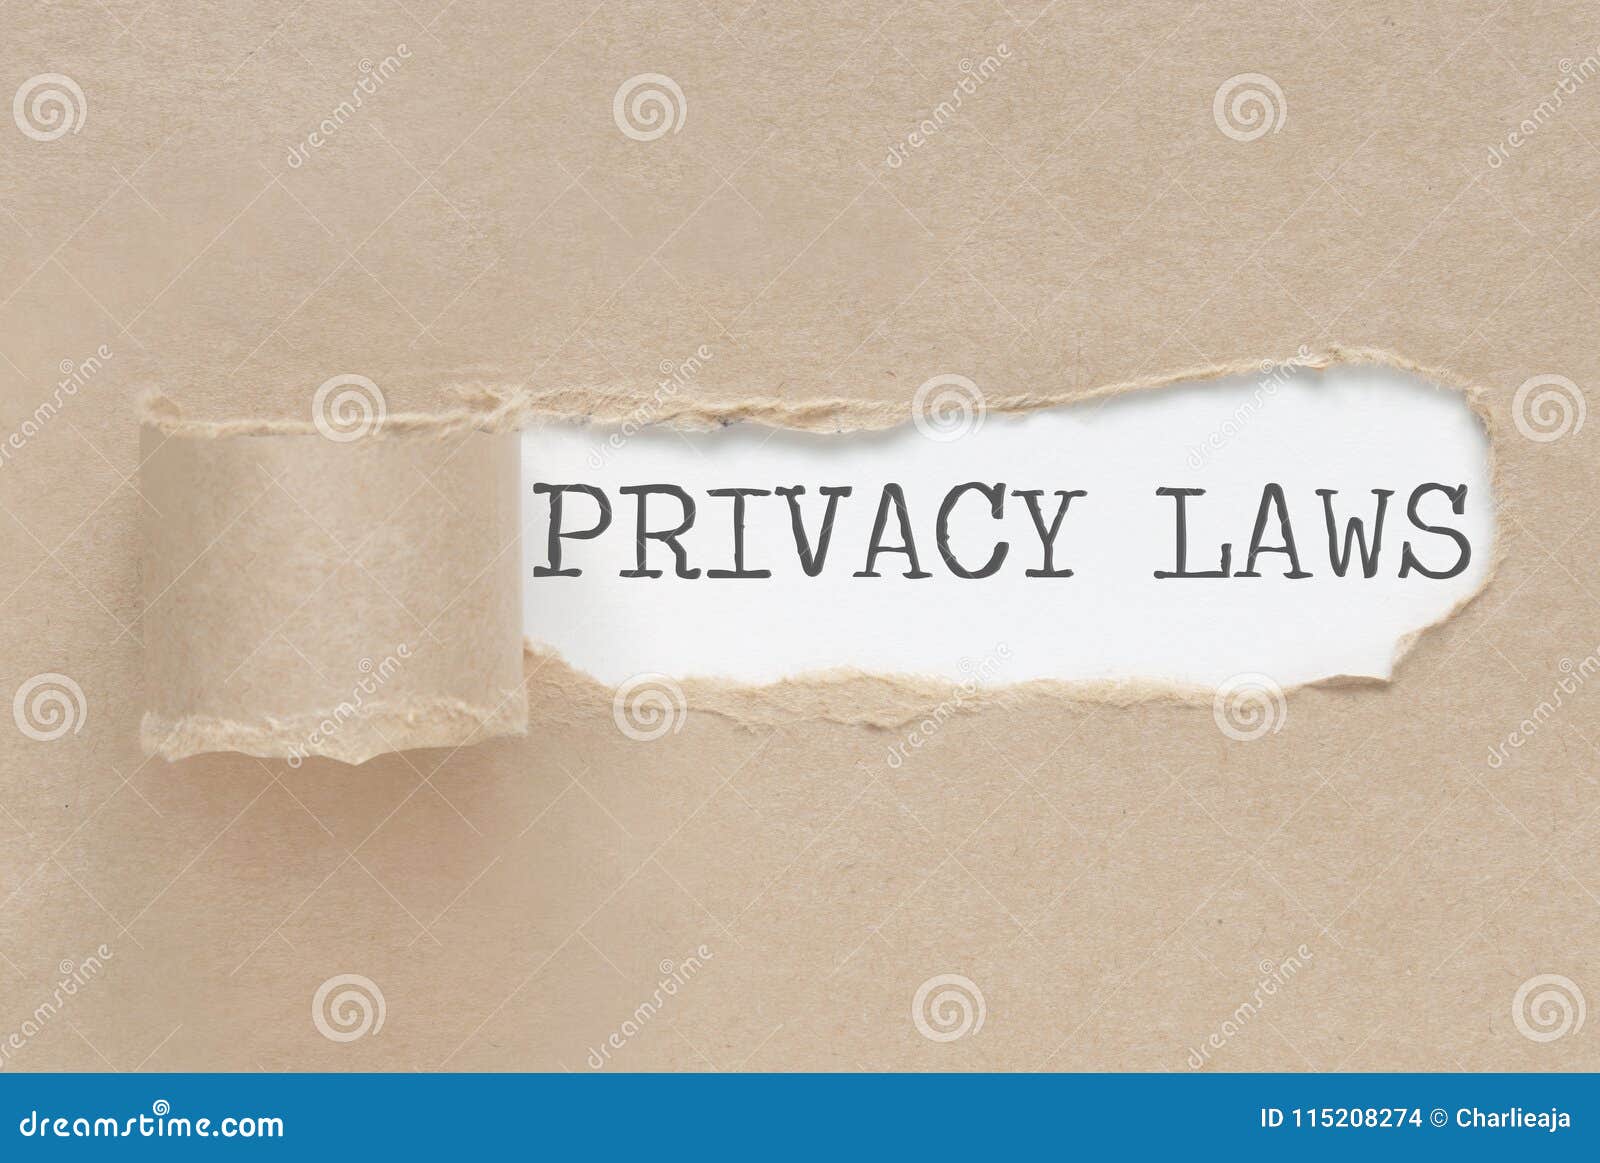 privacy laws uncovered